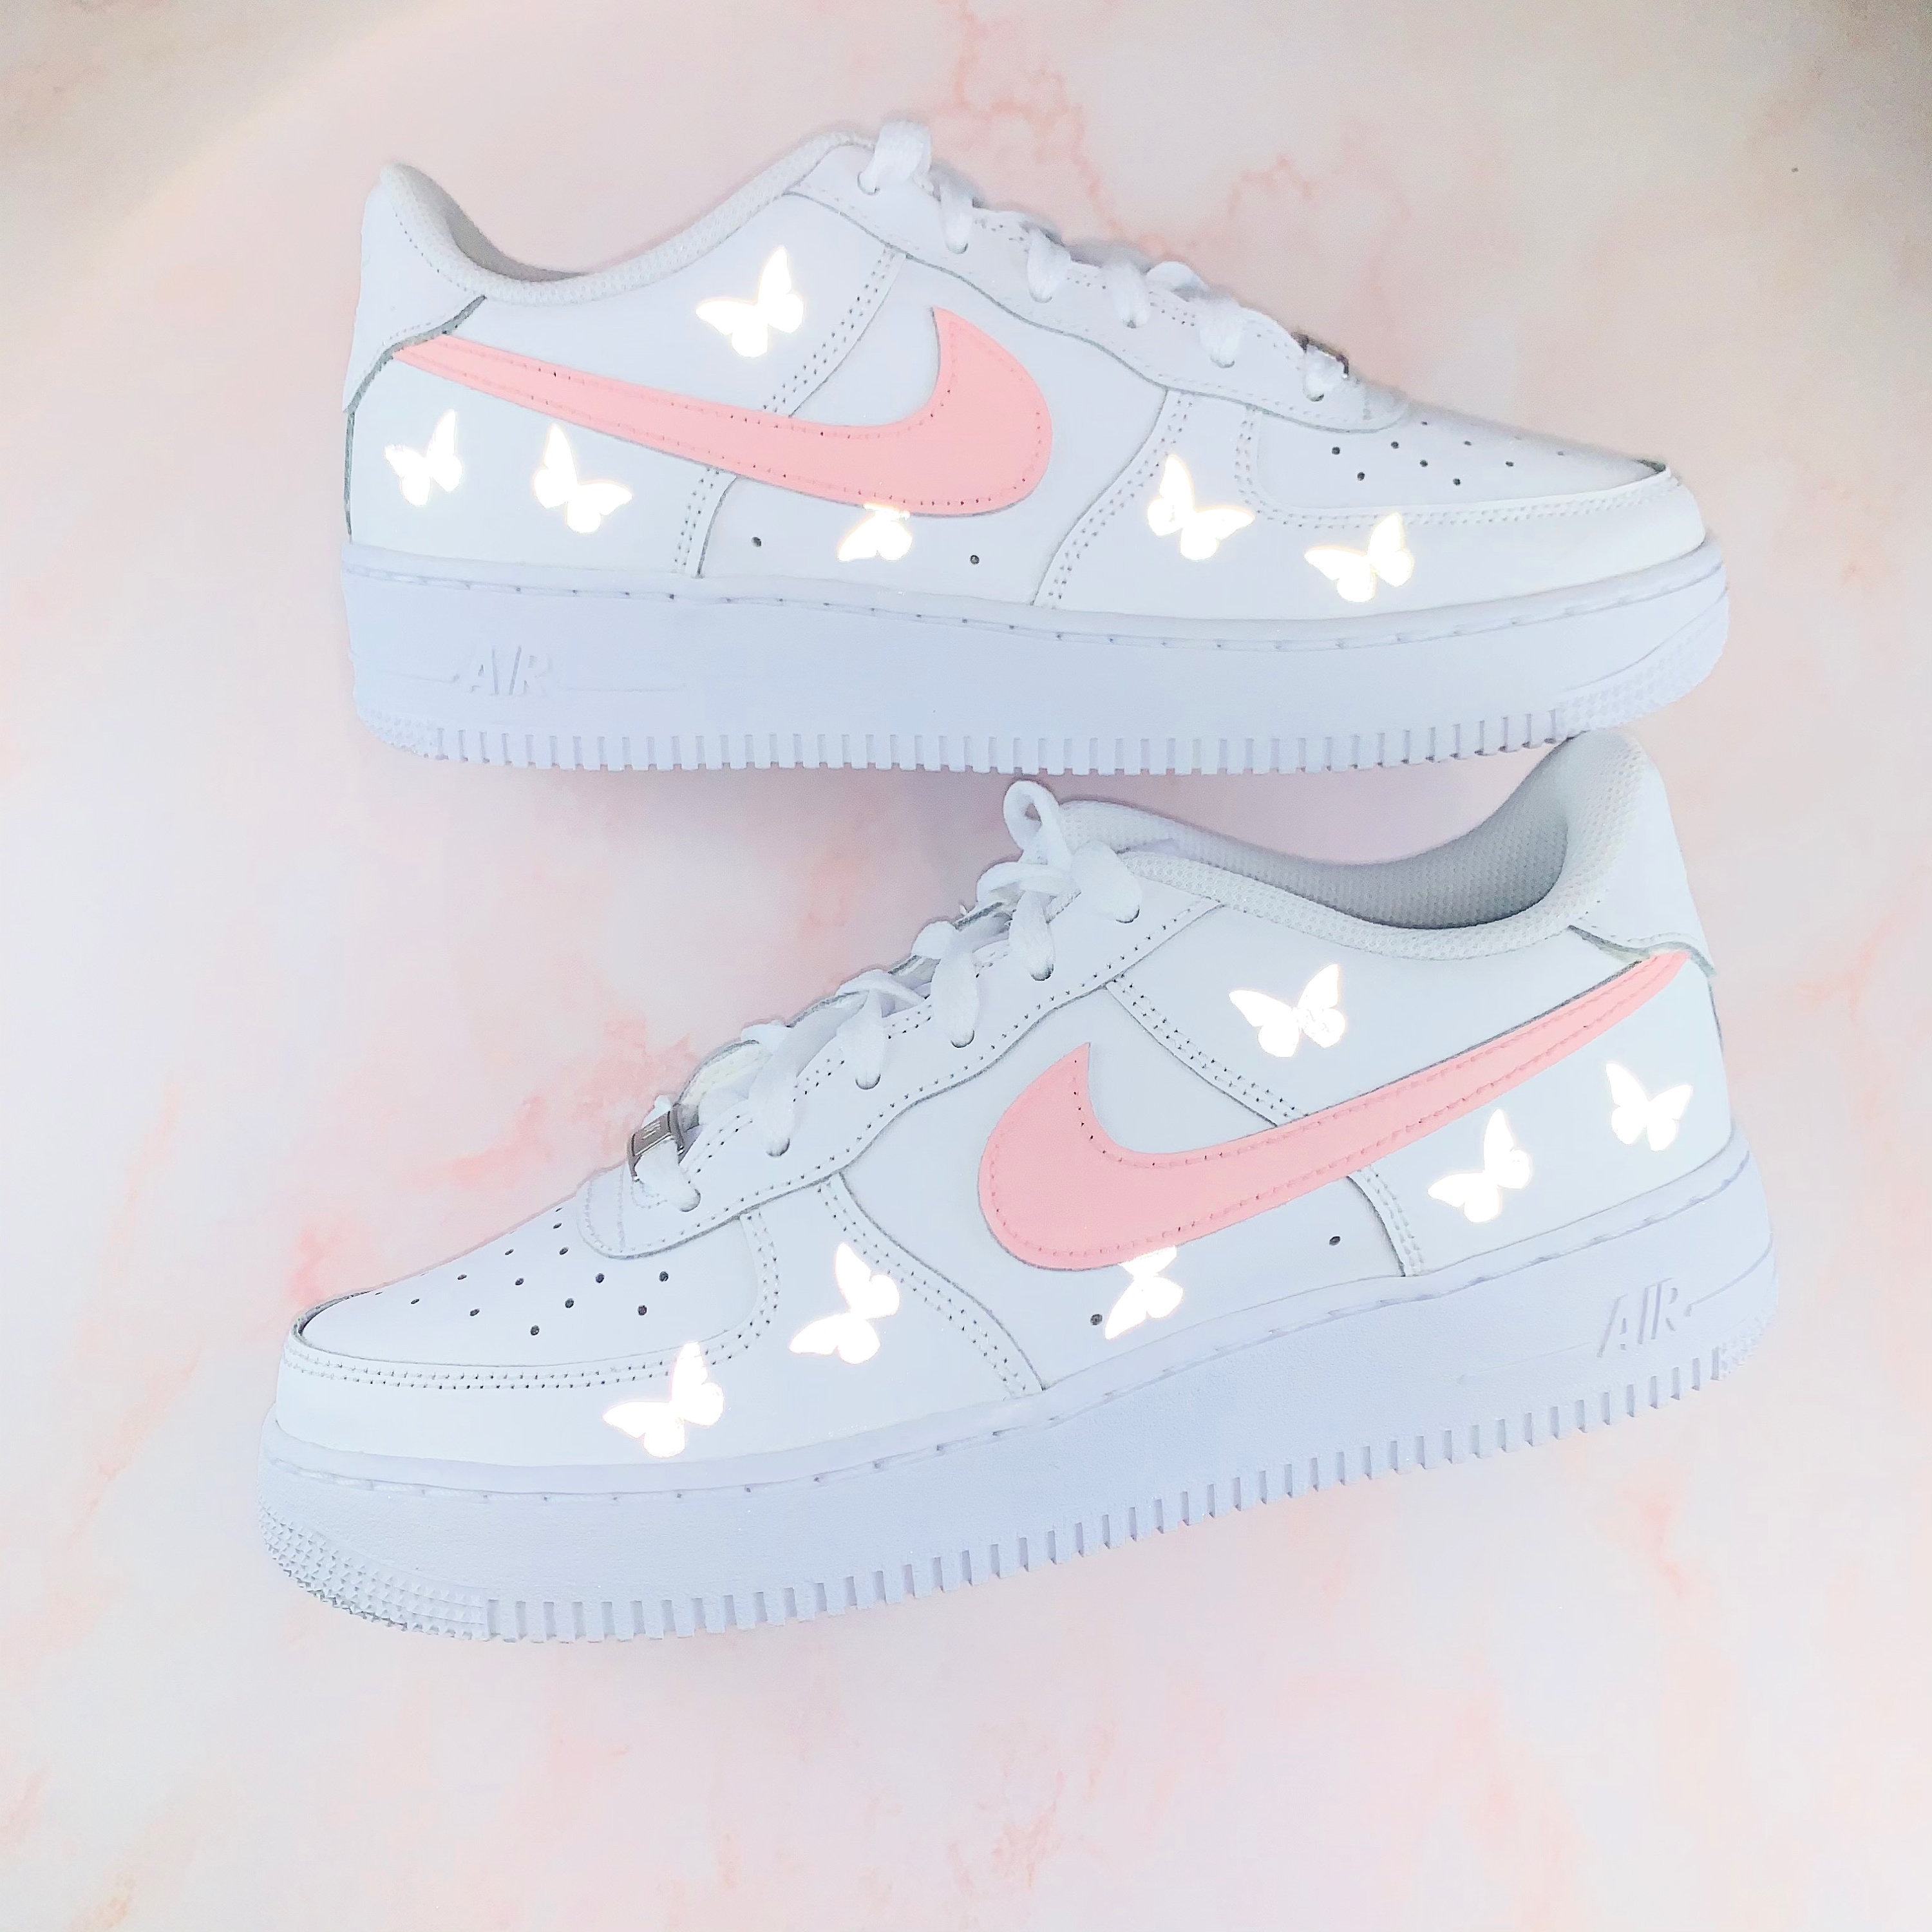 Nike Shoes Womens Custom Air Force 1 Pink Painted Butterfly Reflective Nikes